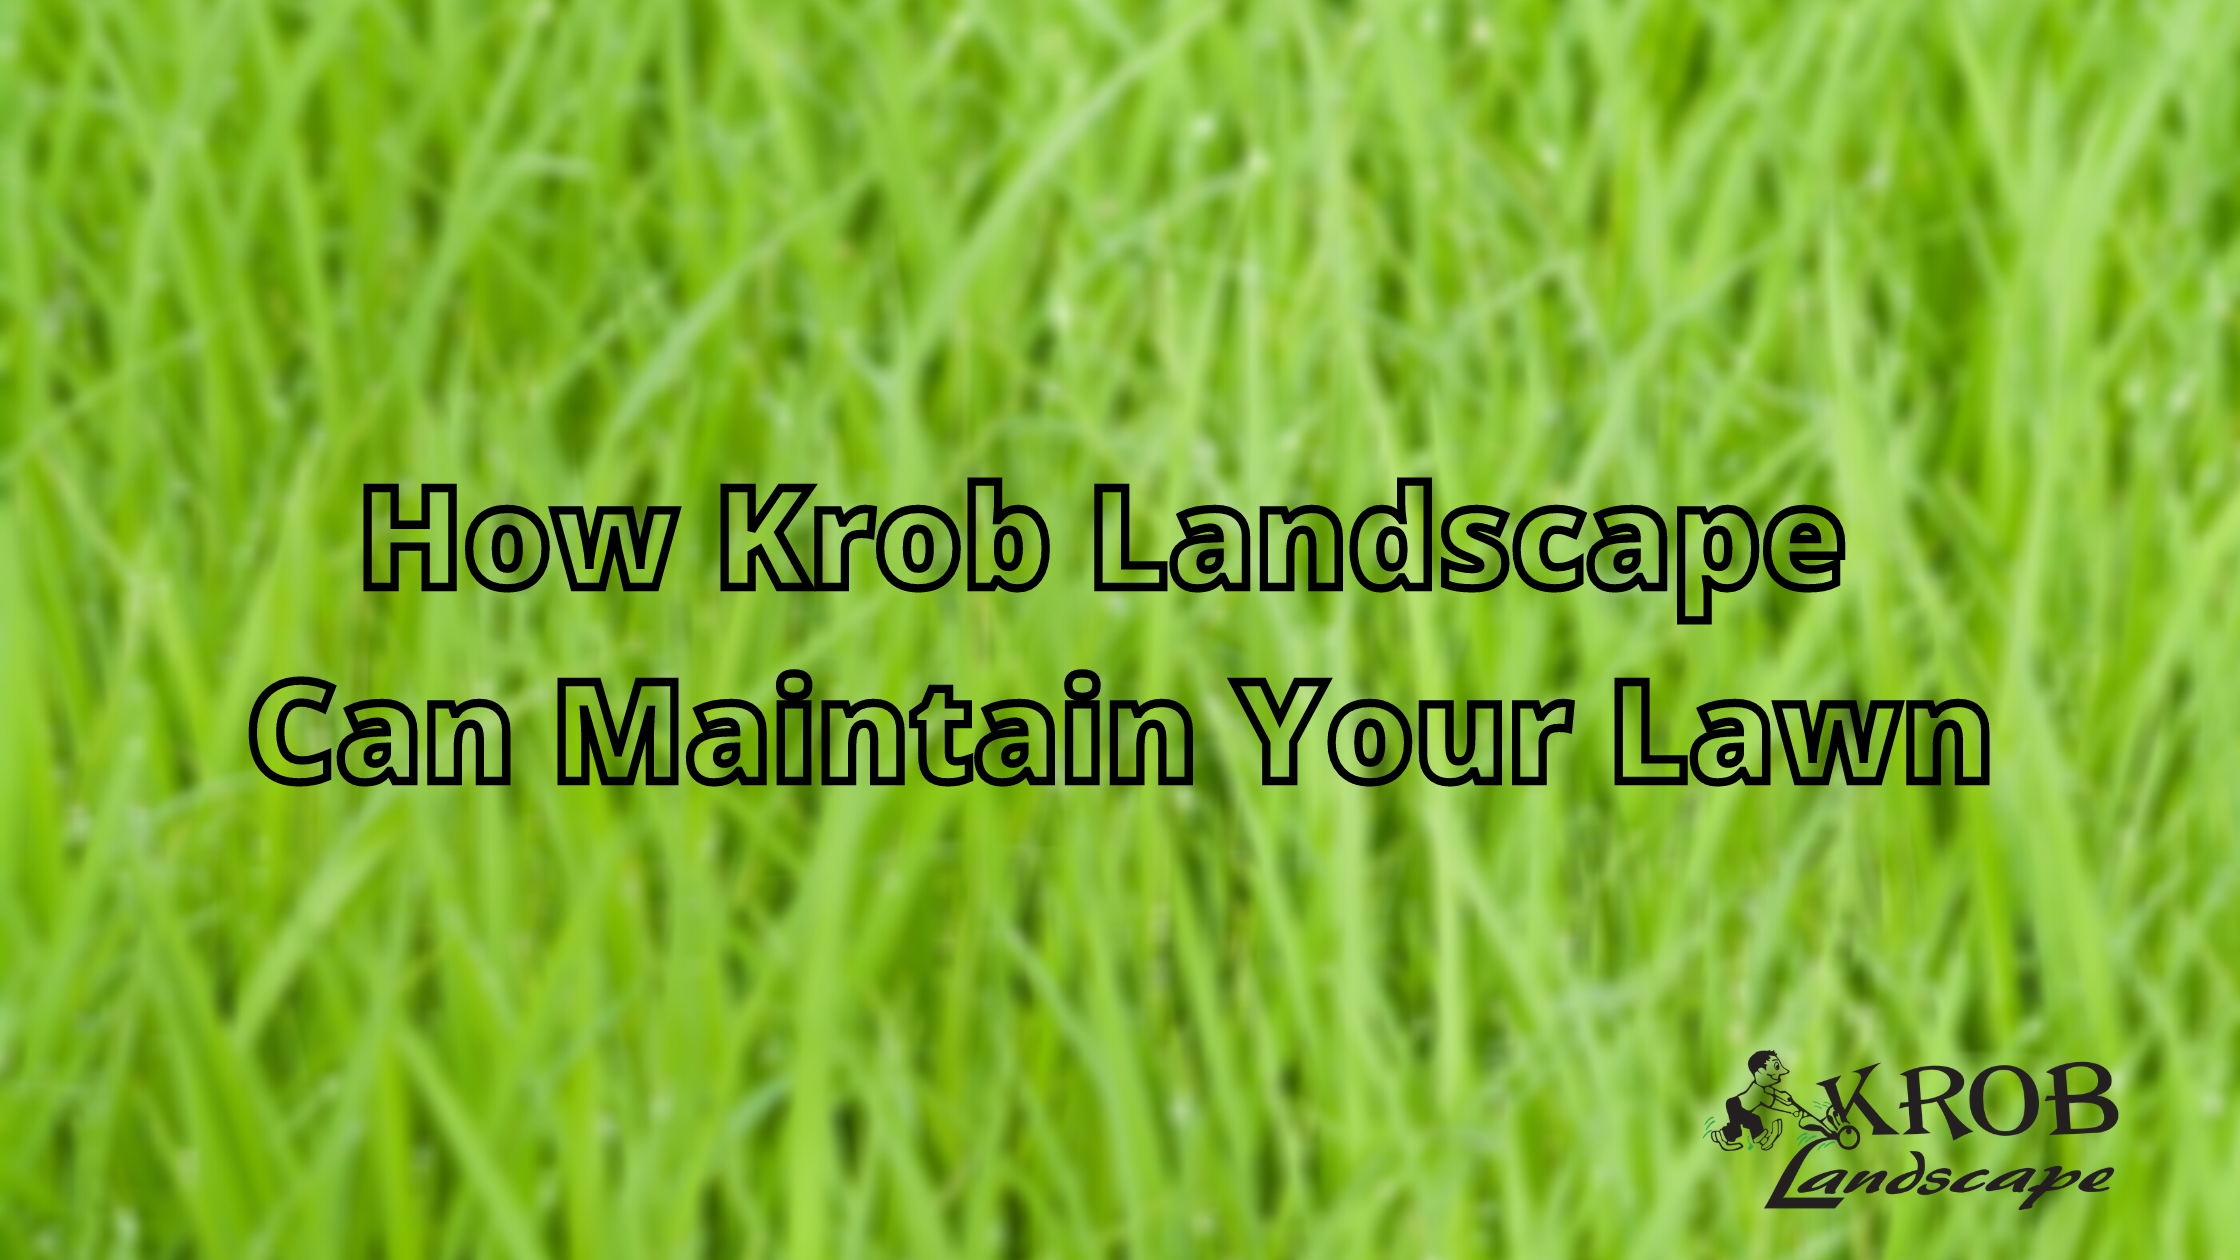 How Krob Landscape Can Maintain Your Lawn.png